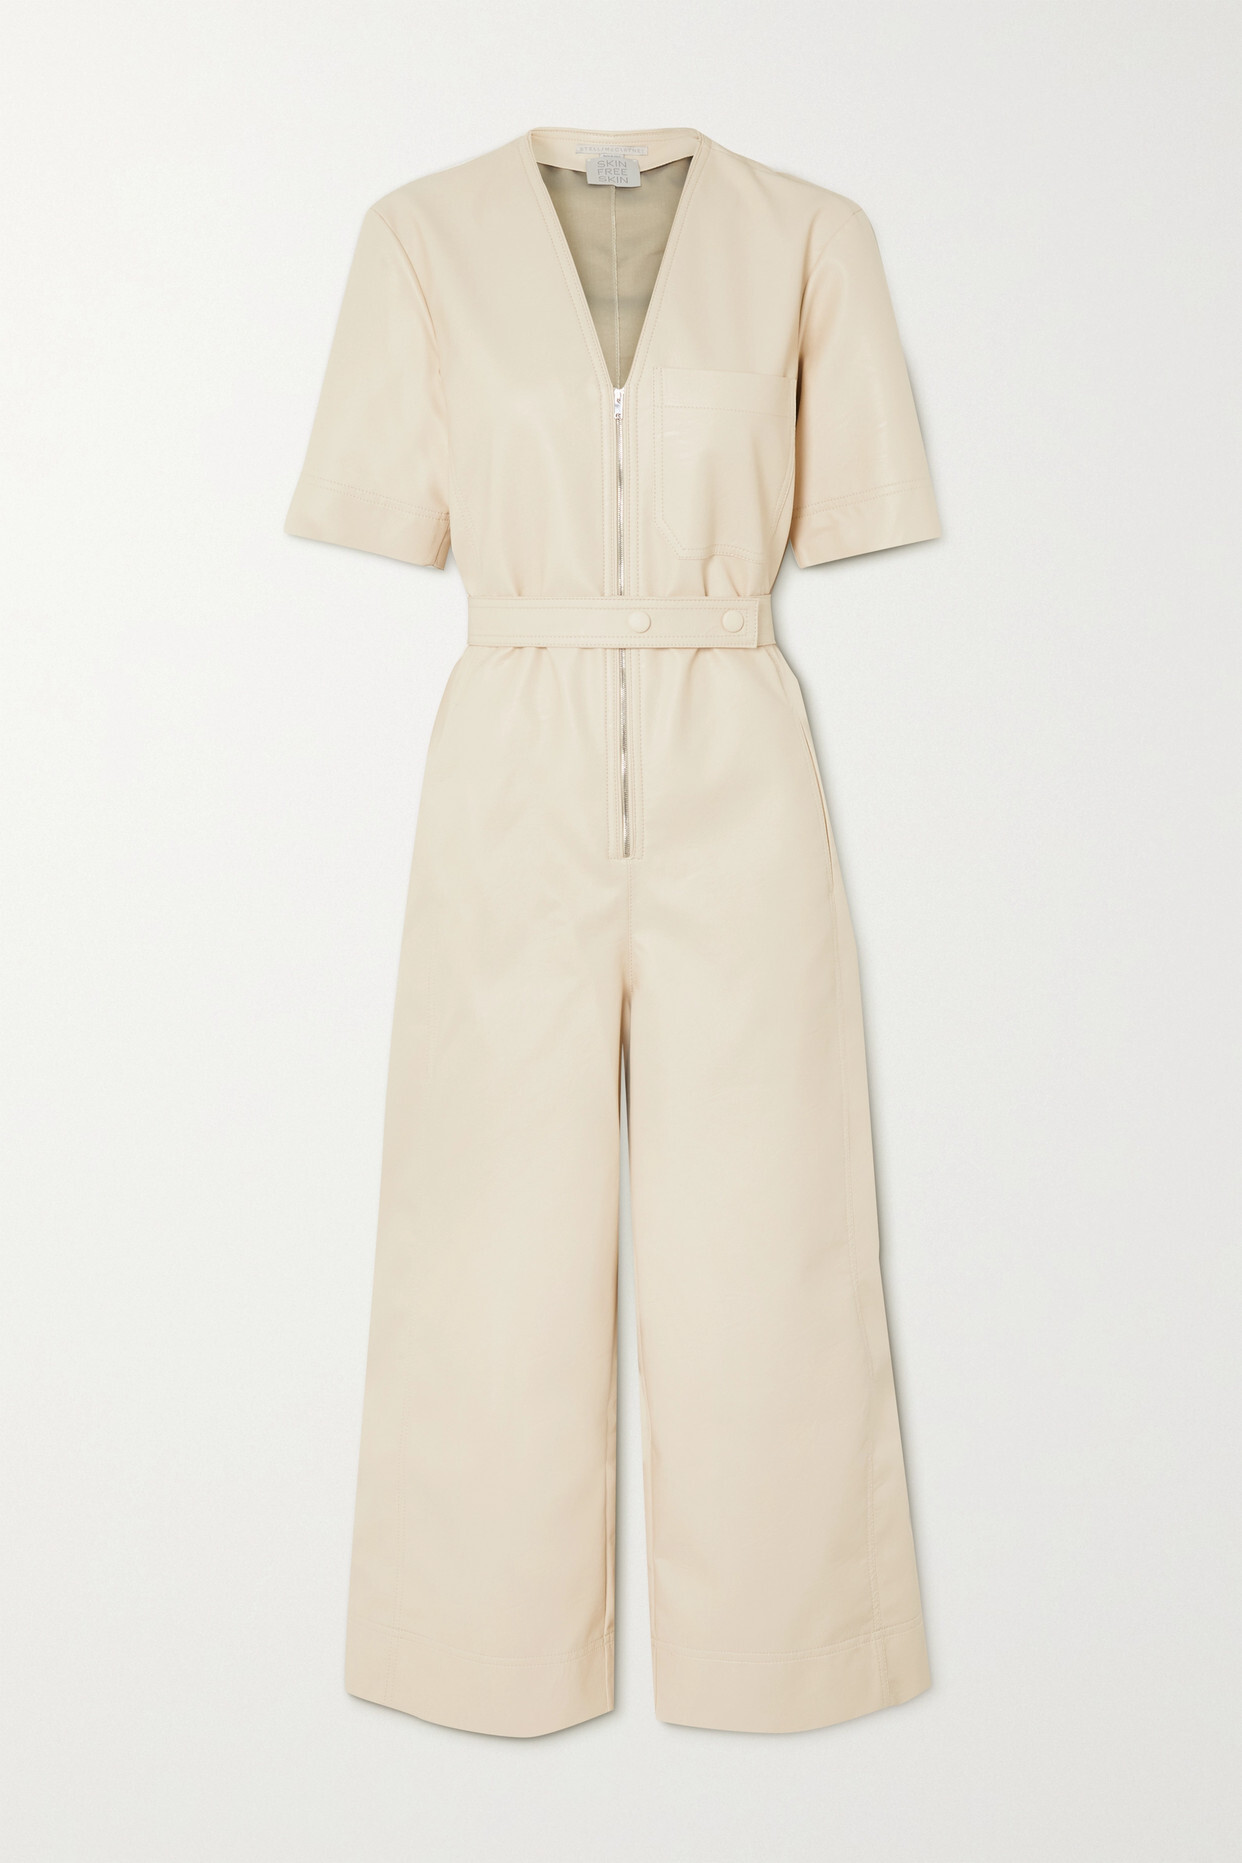 Stella McCartney - Cropped Belted Vegetarian Leather Jumpsuit - Neutrals